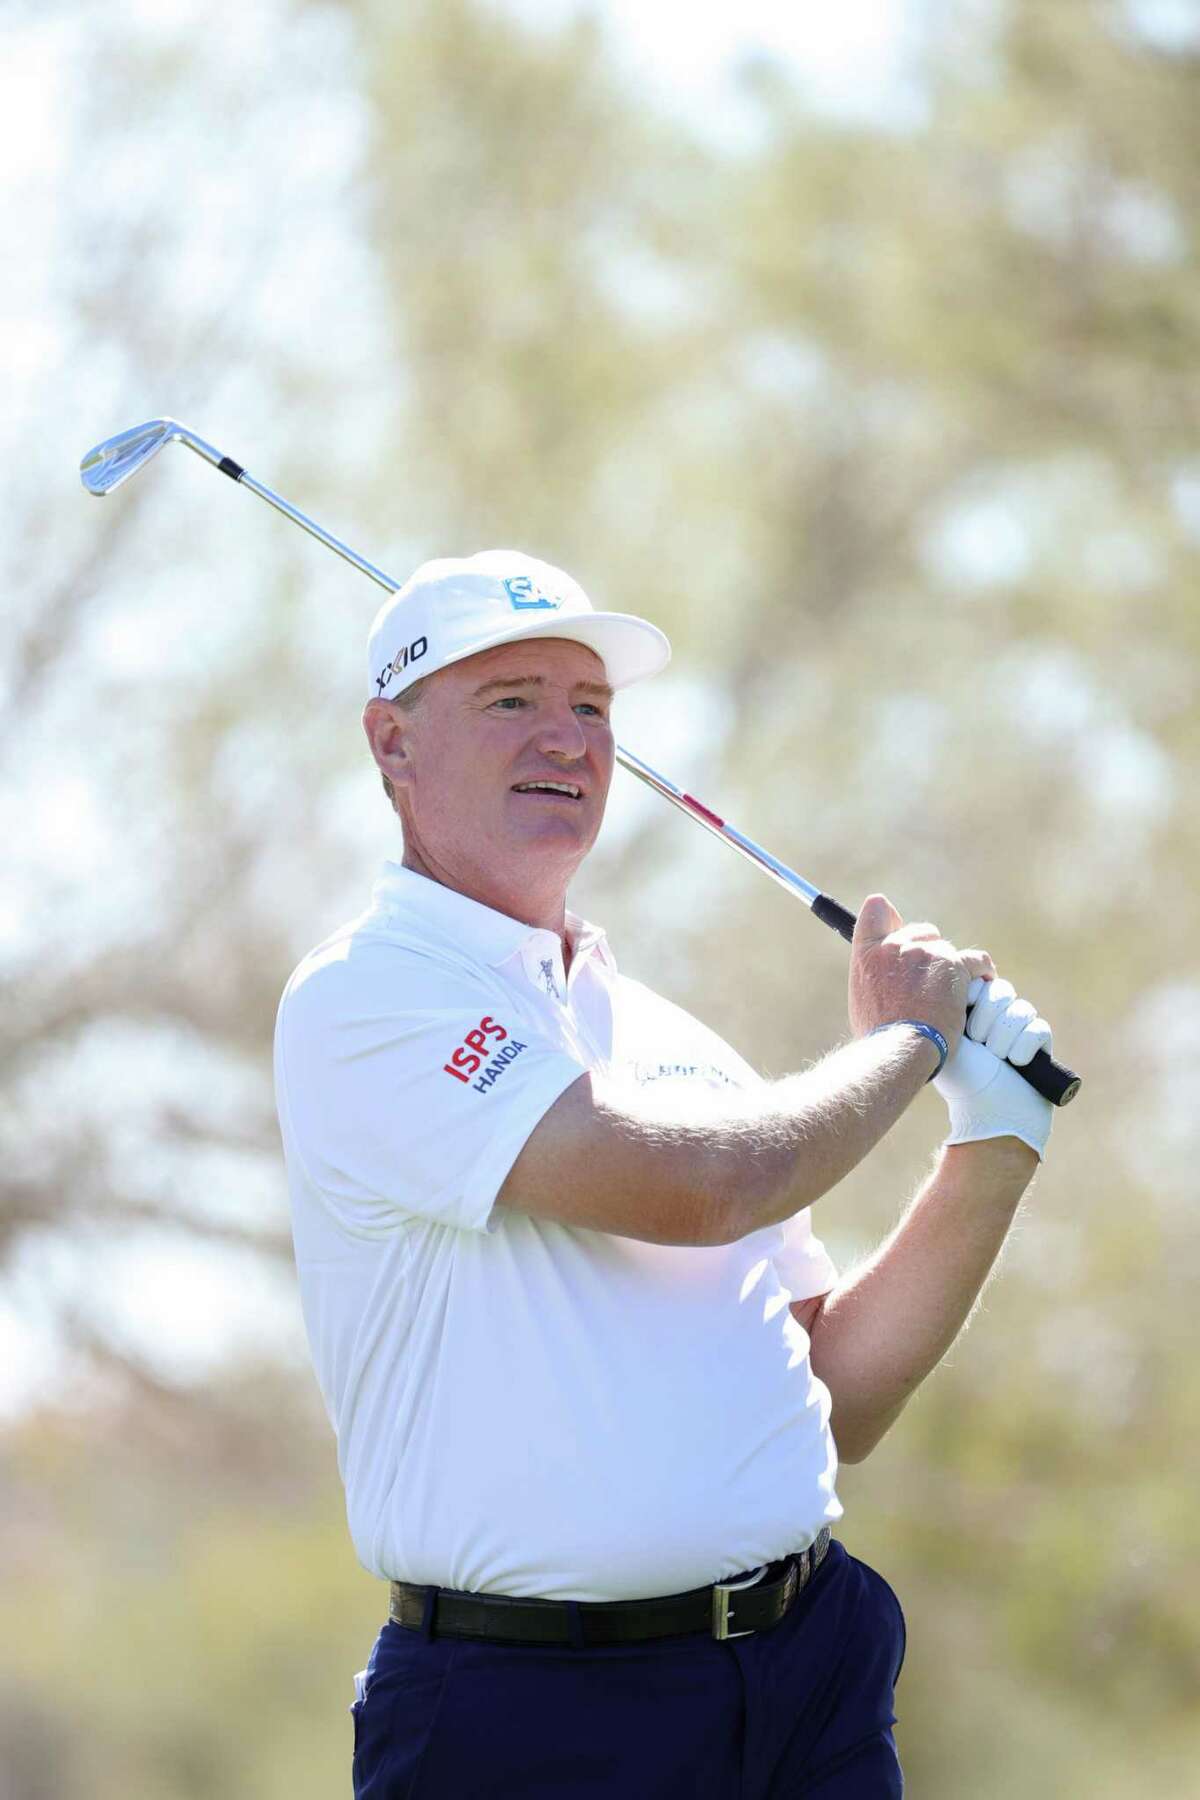 Ernie Els will be playing the Insperity Invitational for the first time this year.